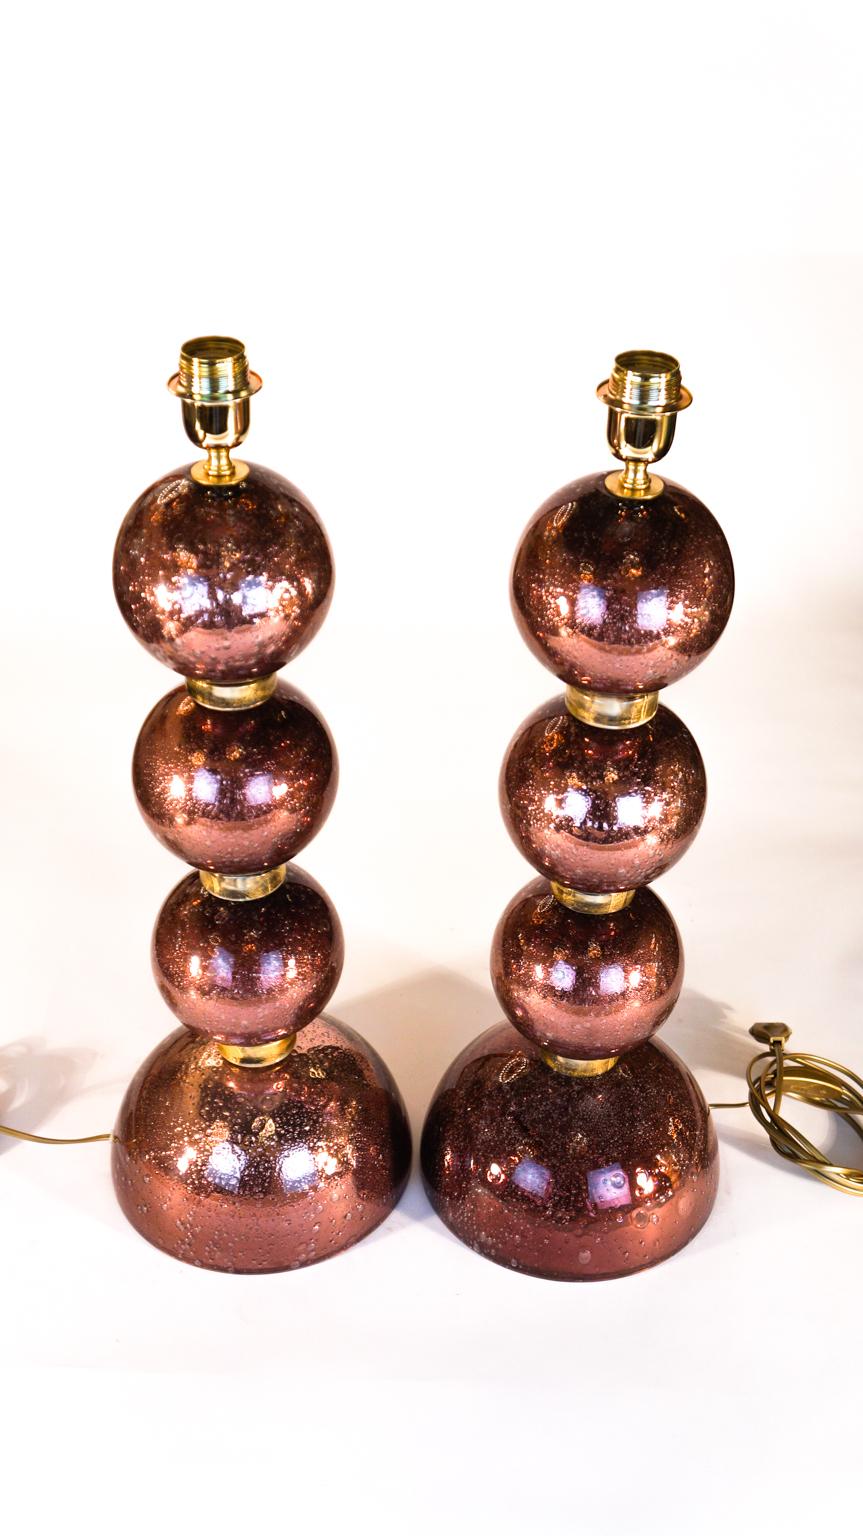 Alberto Donà Mid-Century Modern Italian Murano Glass Pair of Table Lamps, 1995s For Sale 13